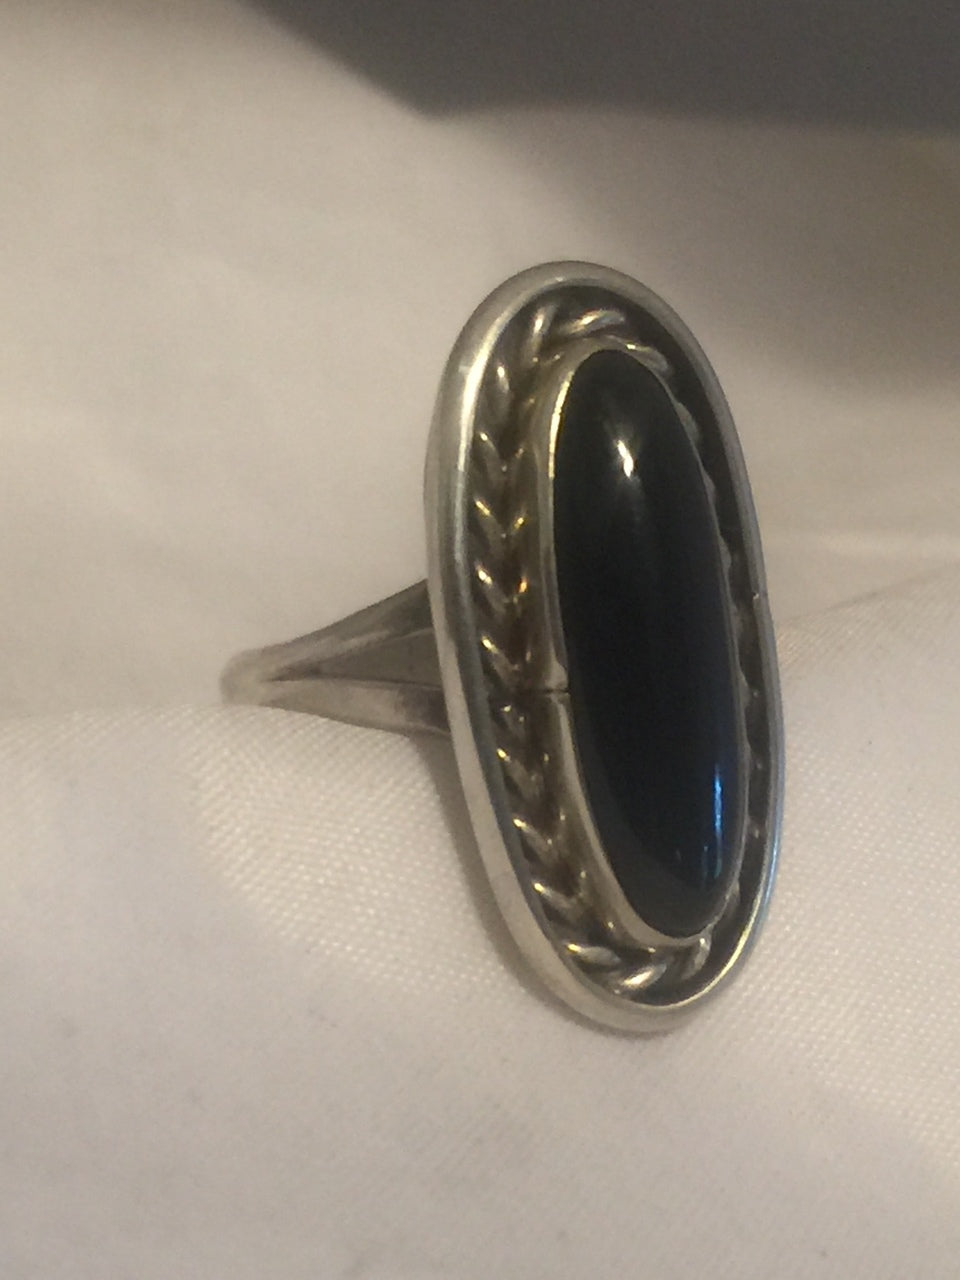 Vintage Sterling Silver Onyx Southwest Tribal Ring Size 5.5 5.4g